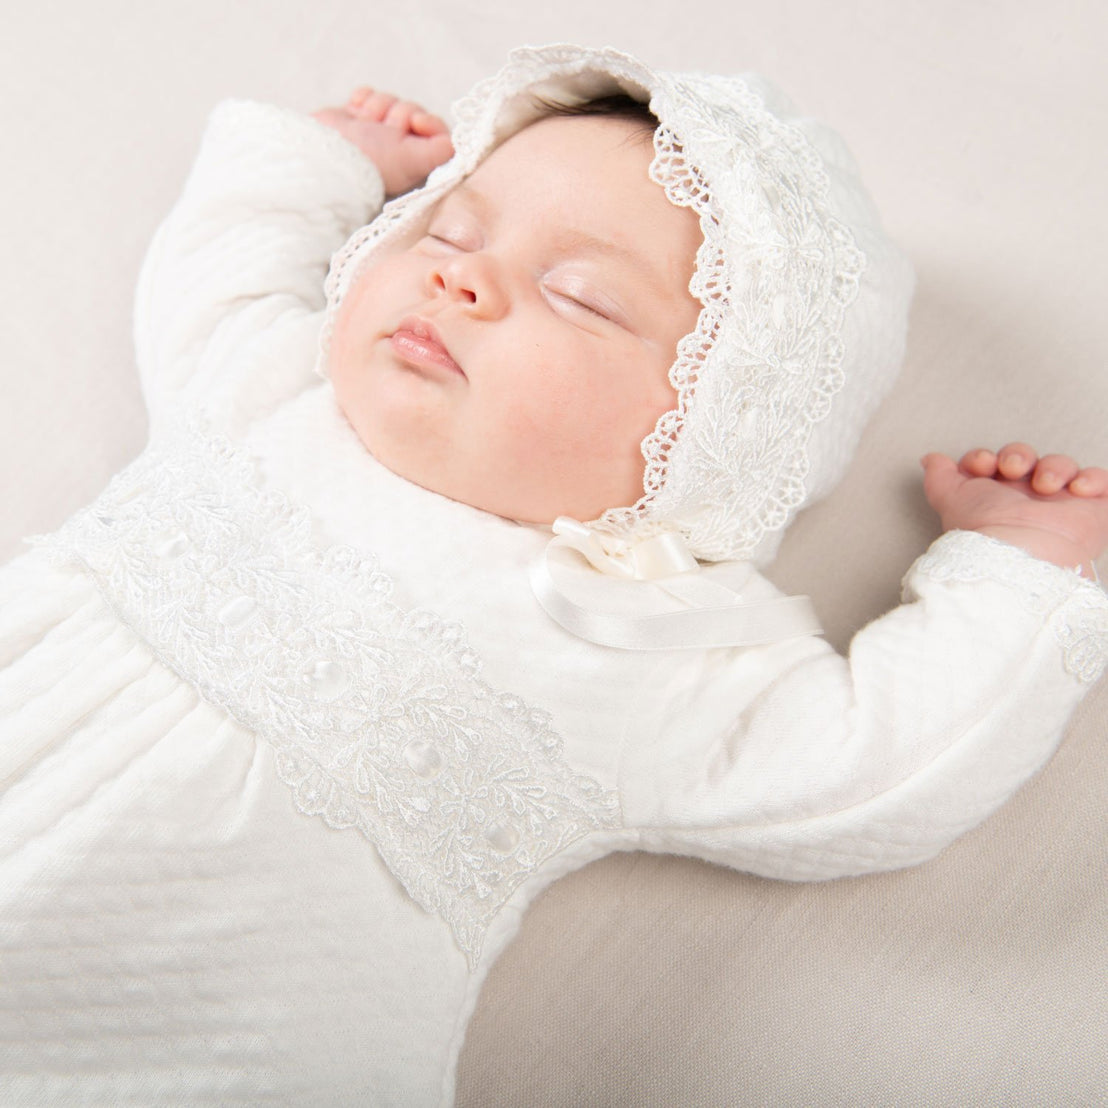 A newborn baby sleeps peacefully, dressed in a Madeline Quilted Newborn Romper and matching bonnet from a boutique, with arms gently rested to the sides on a soft beige background.